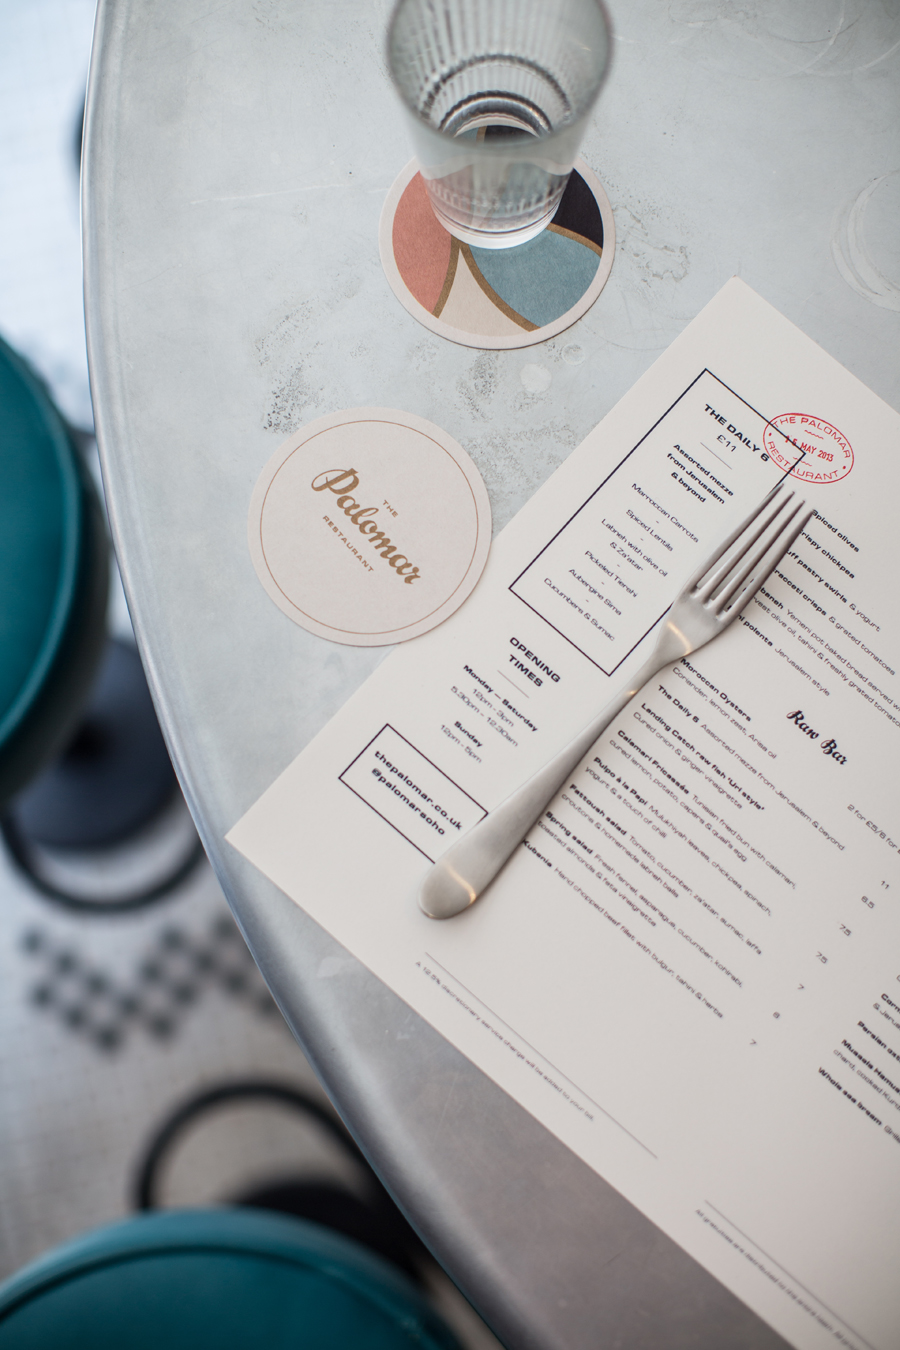 Logotype, menu and coasters with gold foil detail designed by Here for Soho restaurant The Palomar